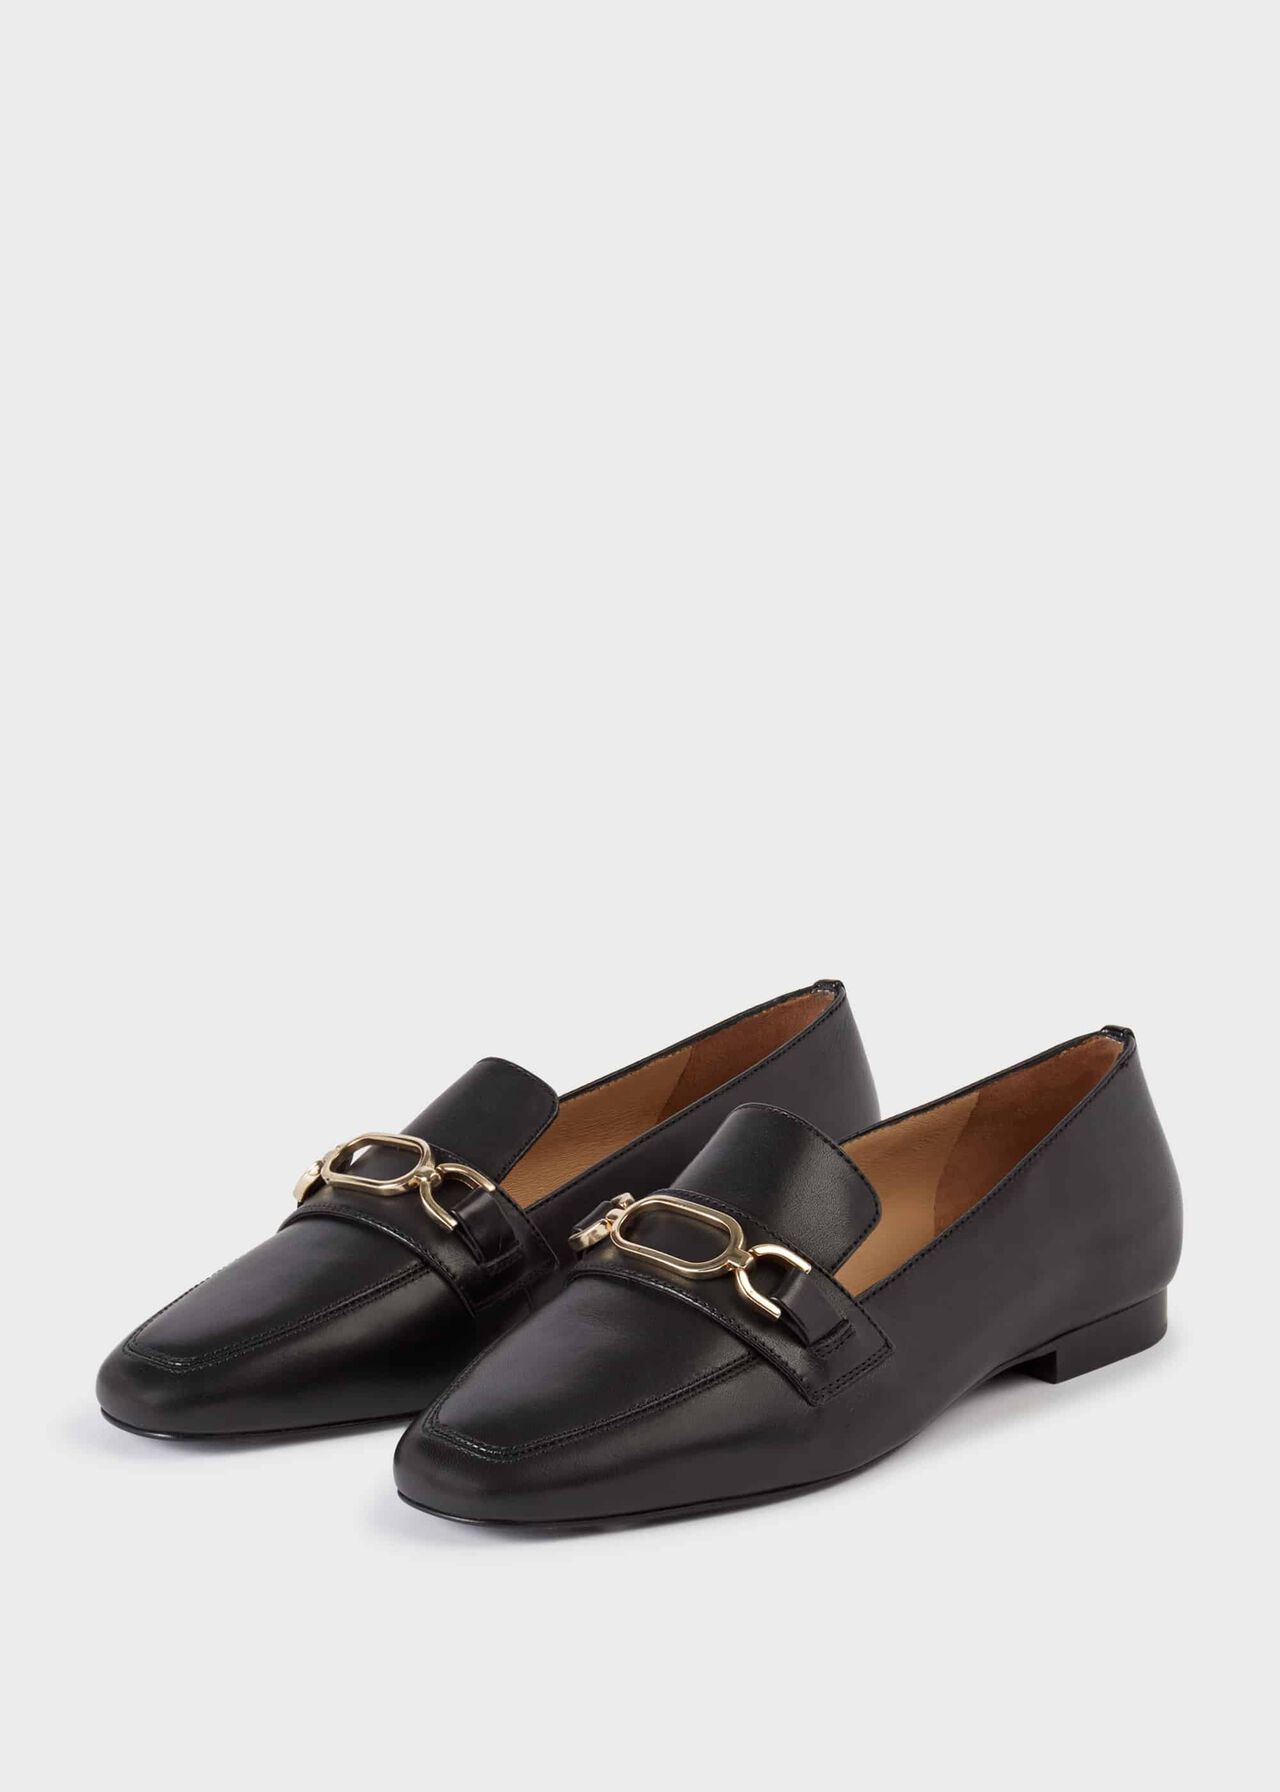 Alexia Leather Flat Shoes